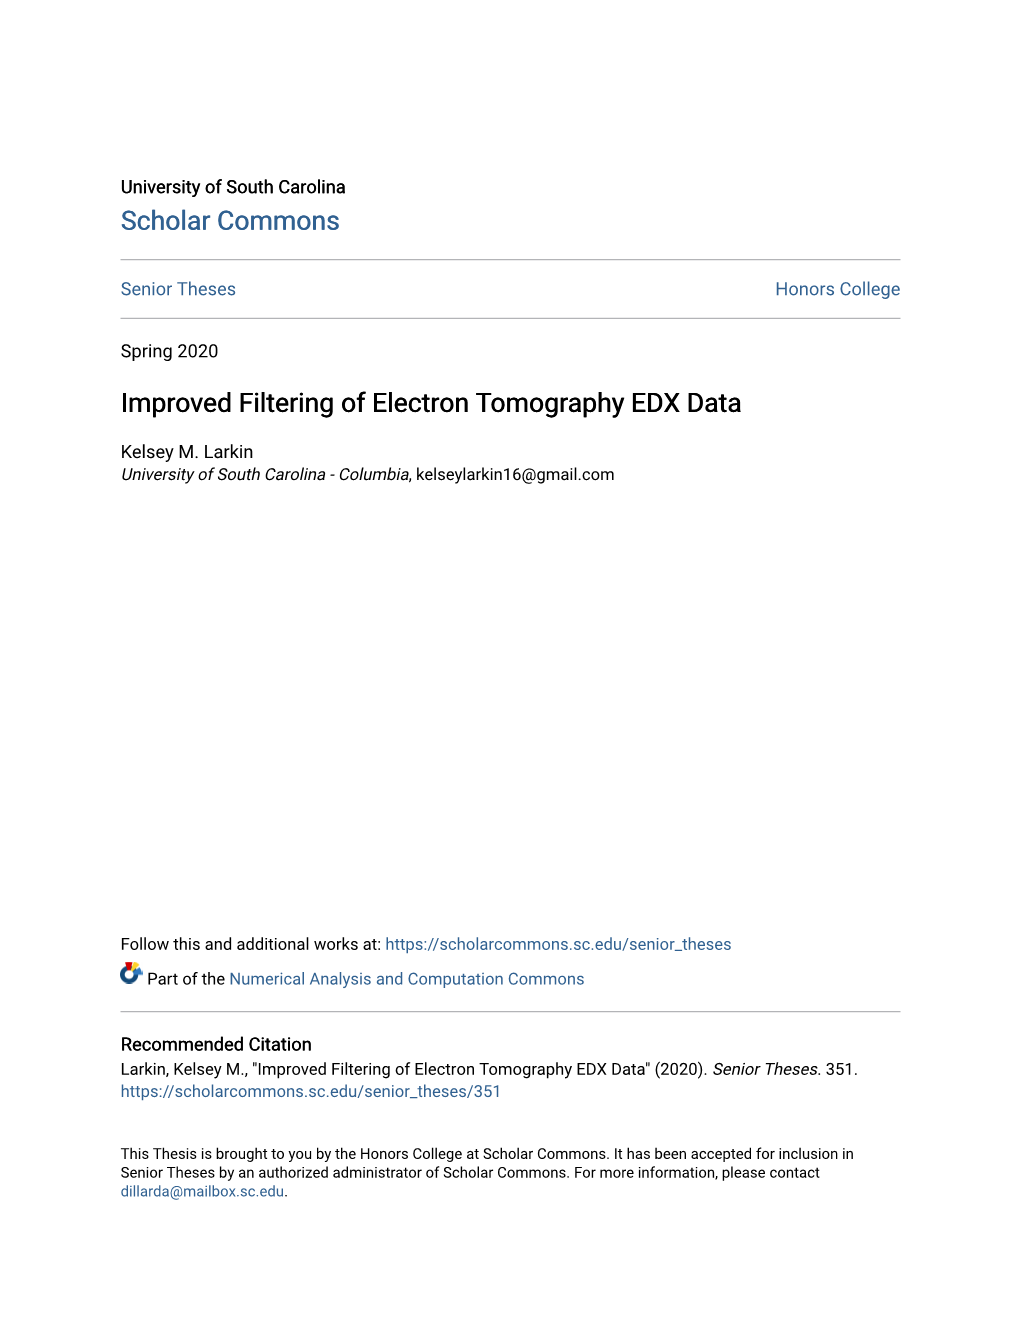 Improved Filtering of Electron Tomography EDX Data